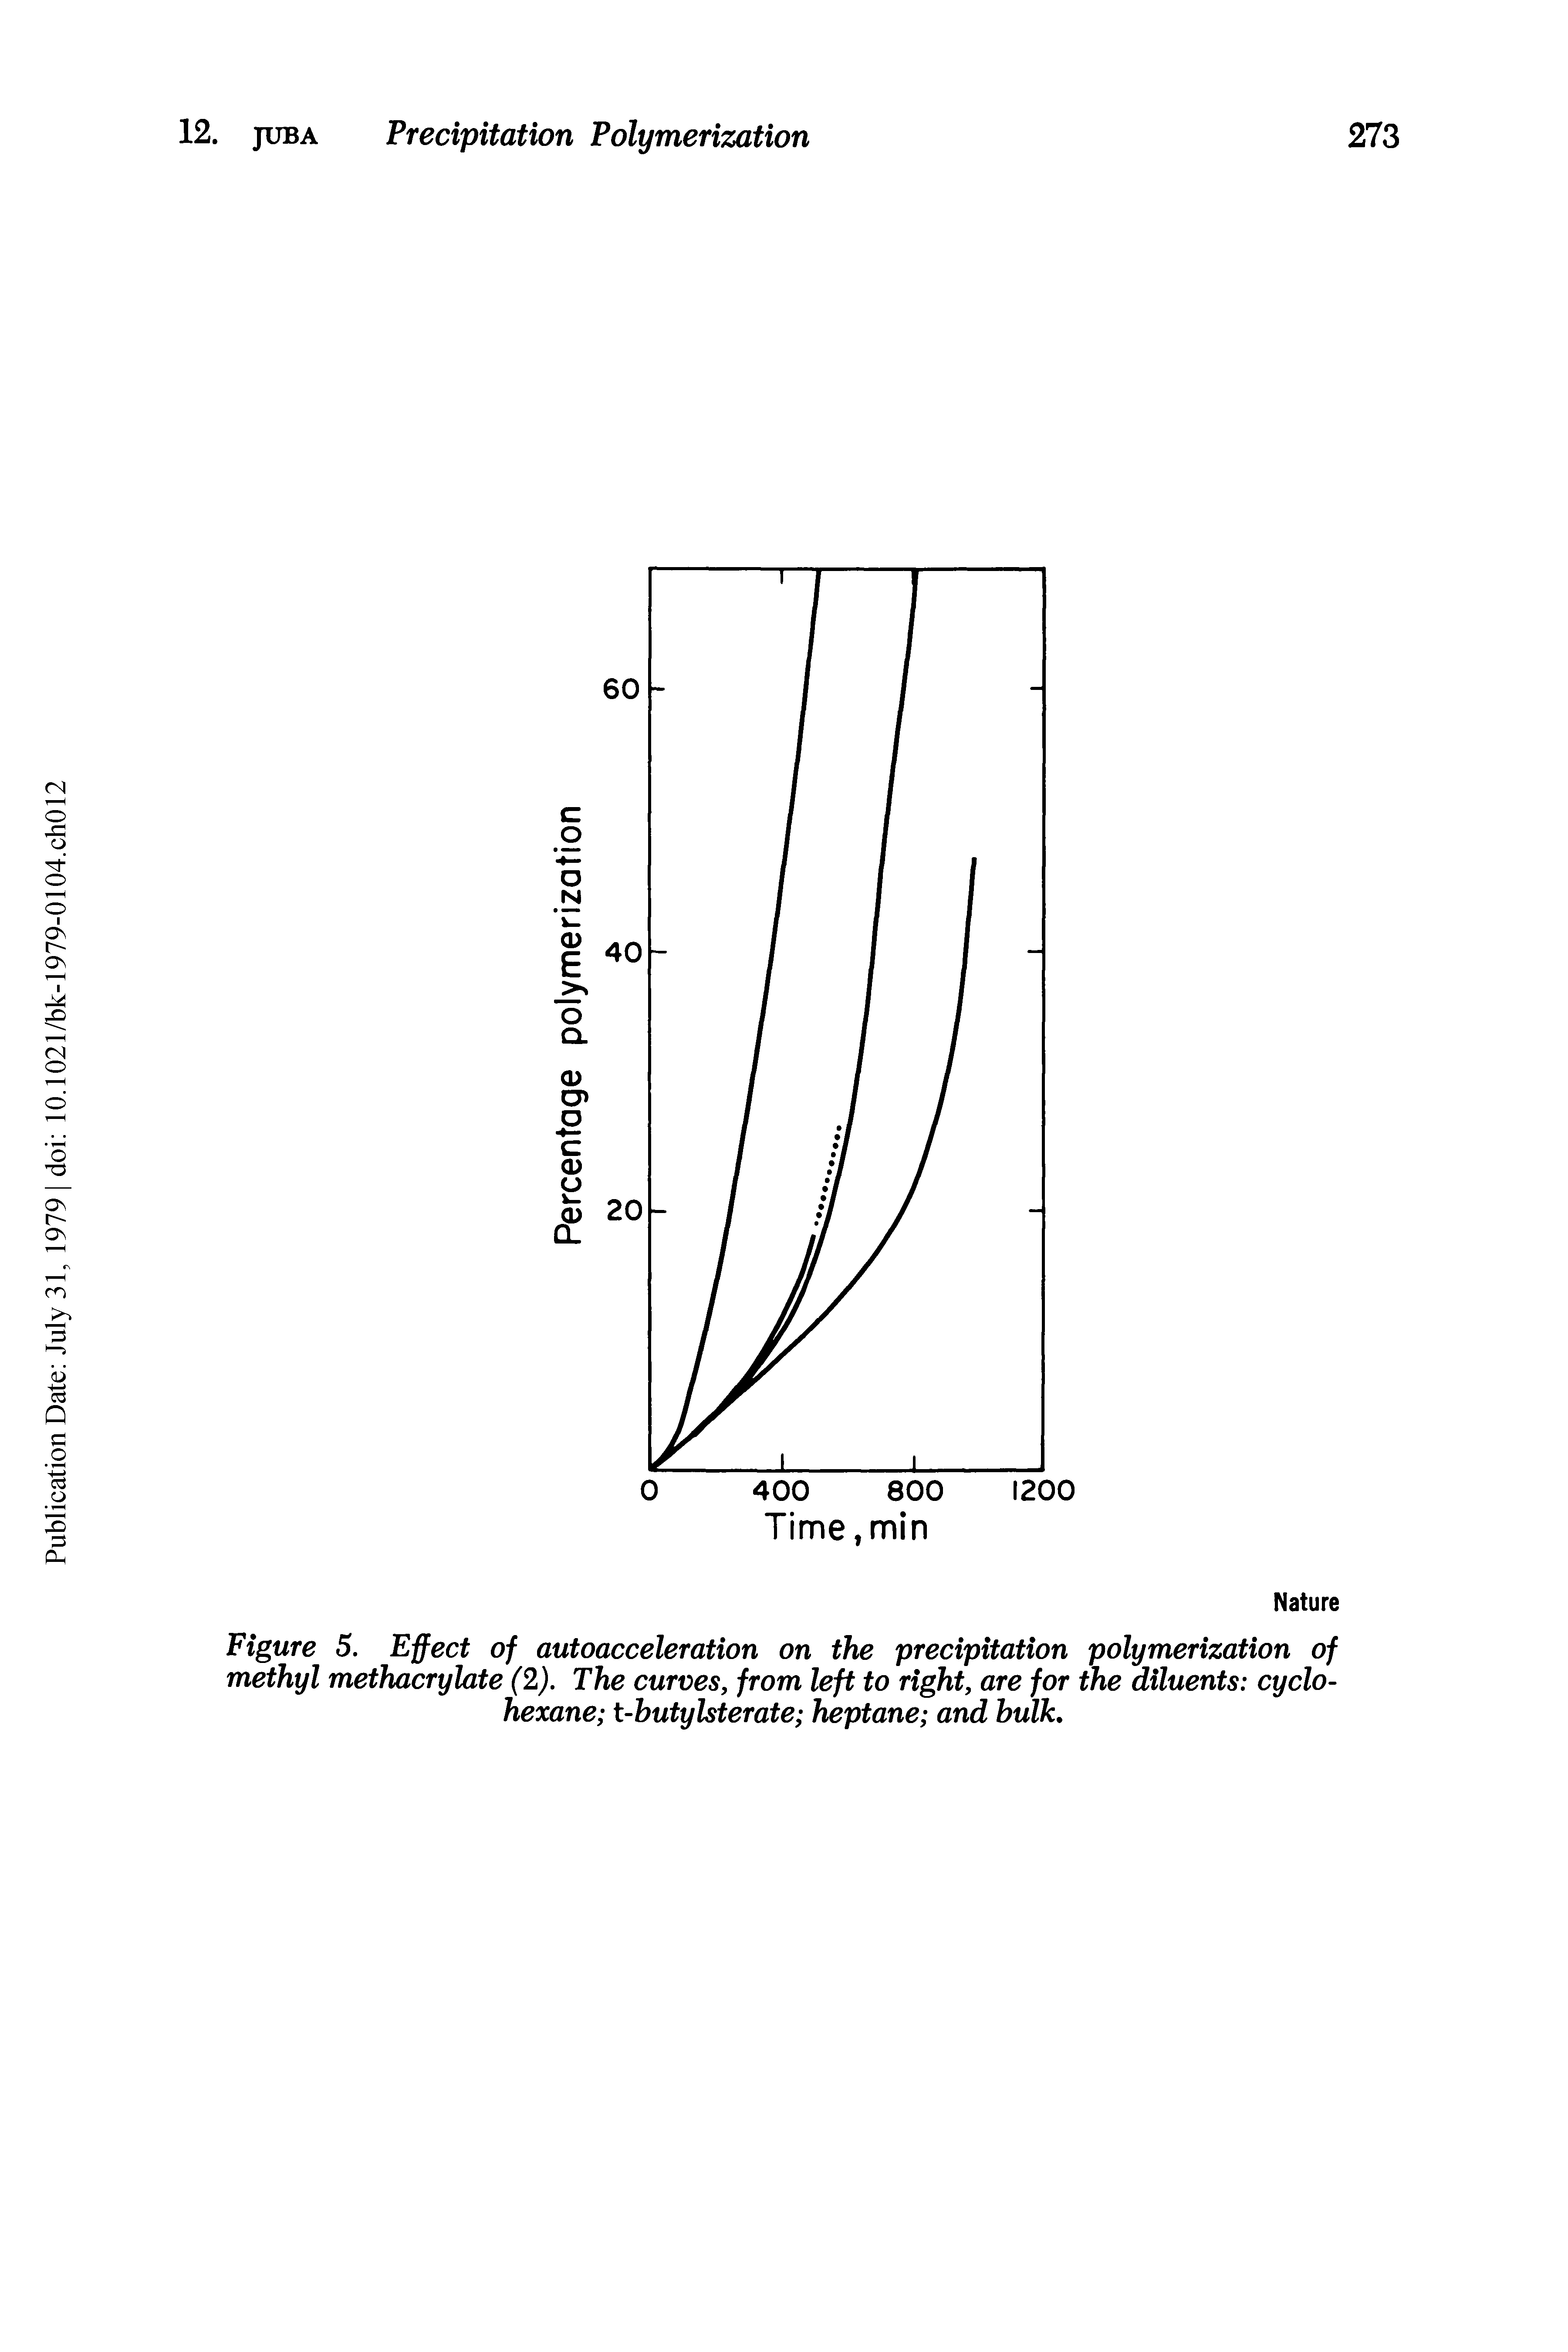 Figure 5. Effect of autoacceleration on the precipitation polymerization of methyl methacrylate (2). The curves, from left to right, are for the diluents cyclohexane t-hutylsterate heptane and bulk.